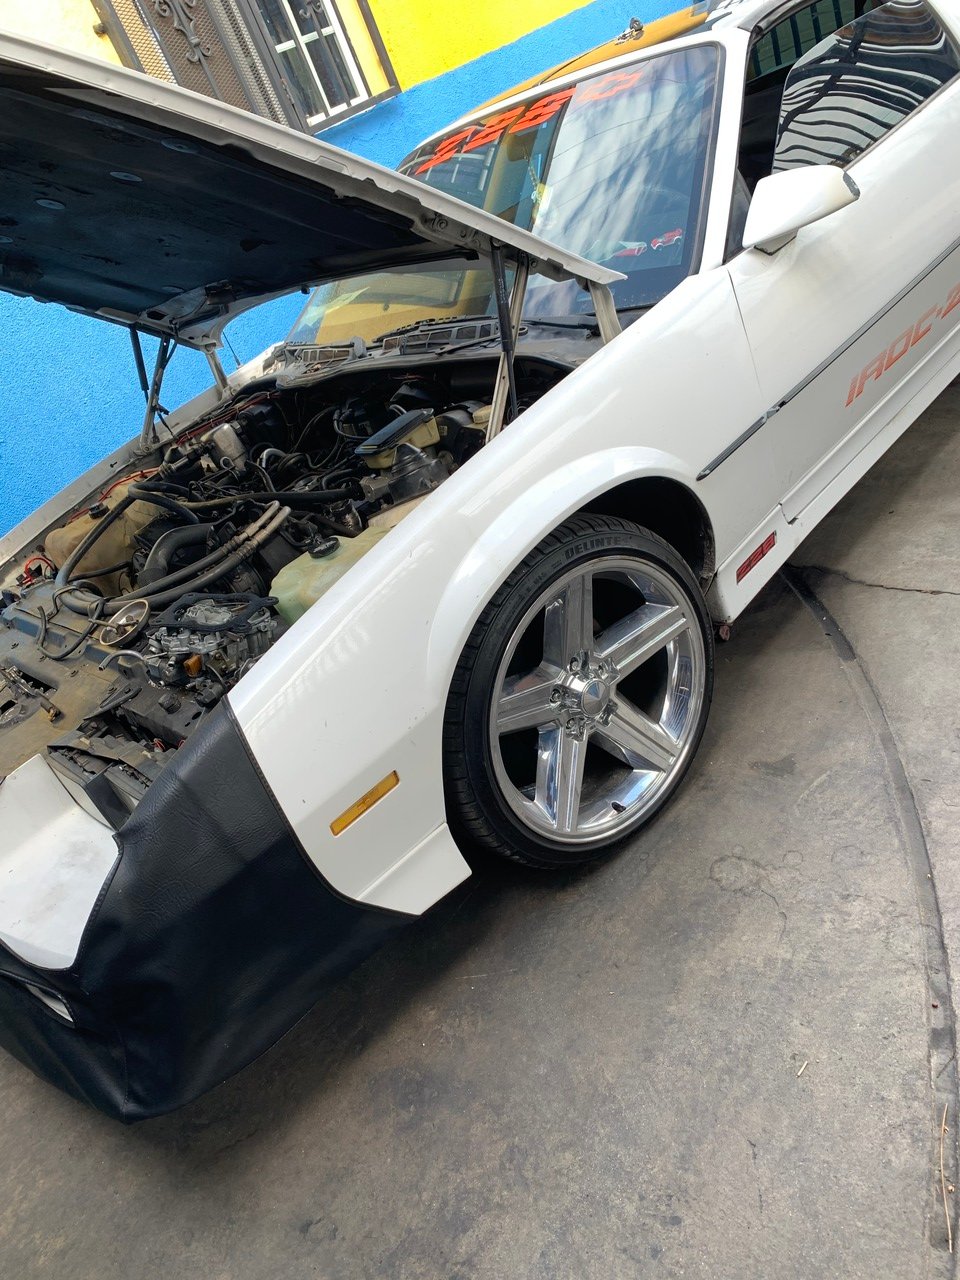 Another Carburetor rebuild for this 1986 Chevy Camero Iroc-Z